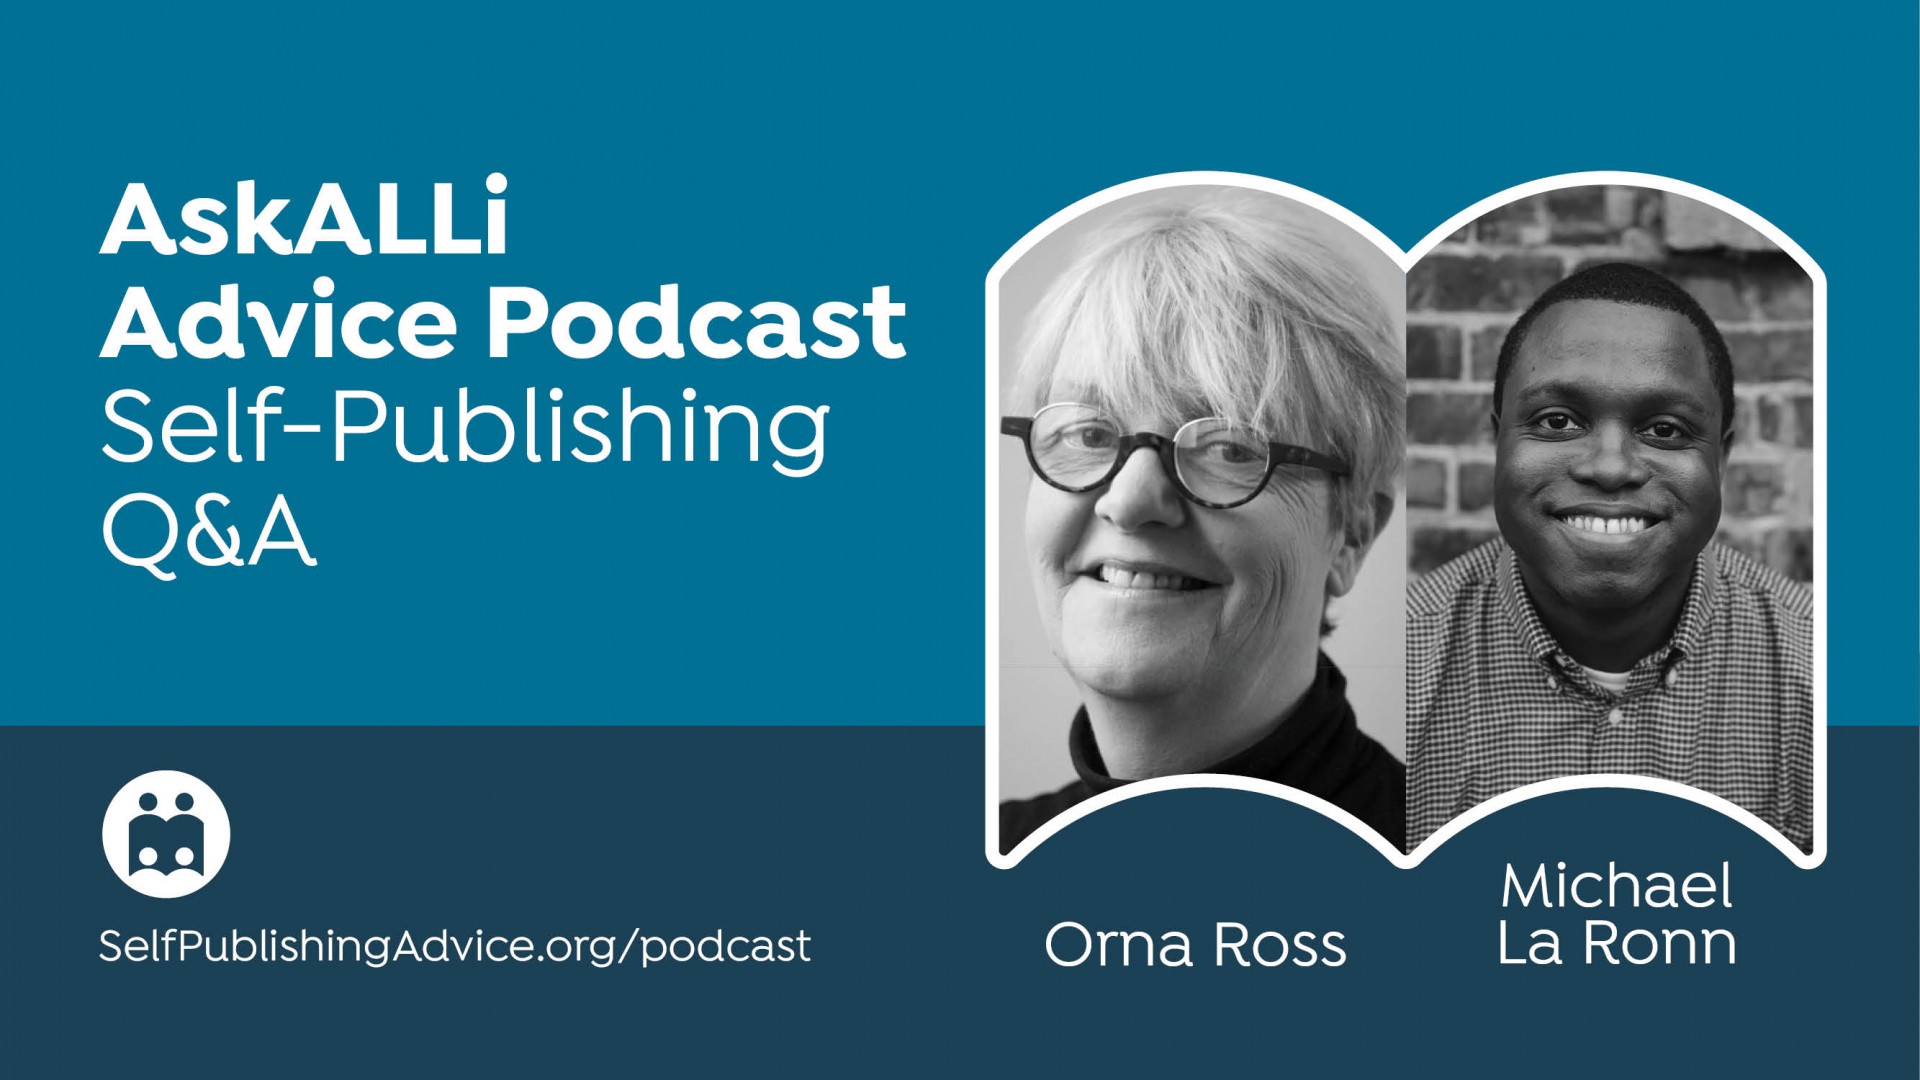 PODCAST: How Do I Manage My Privacy As An Author?